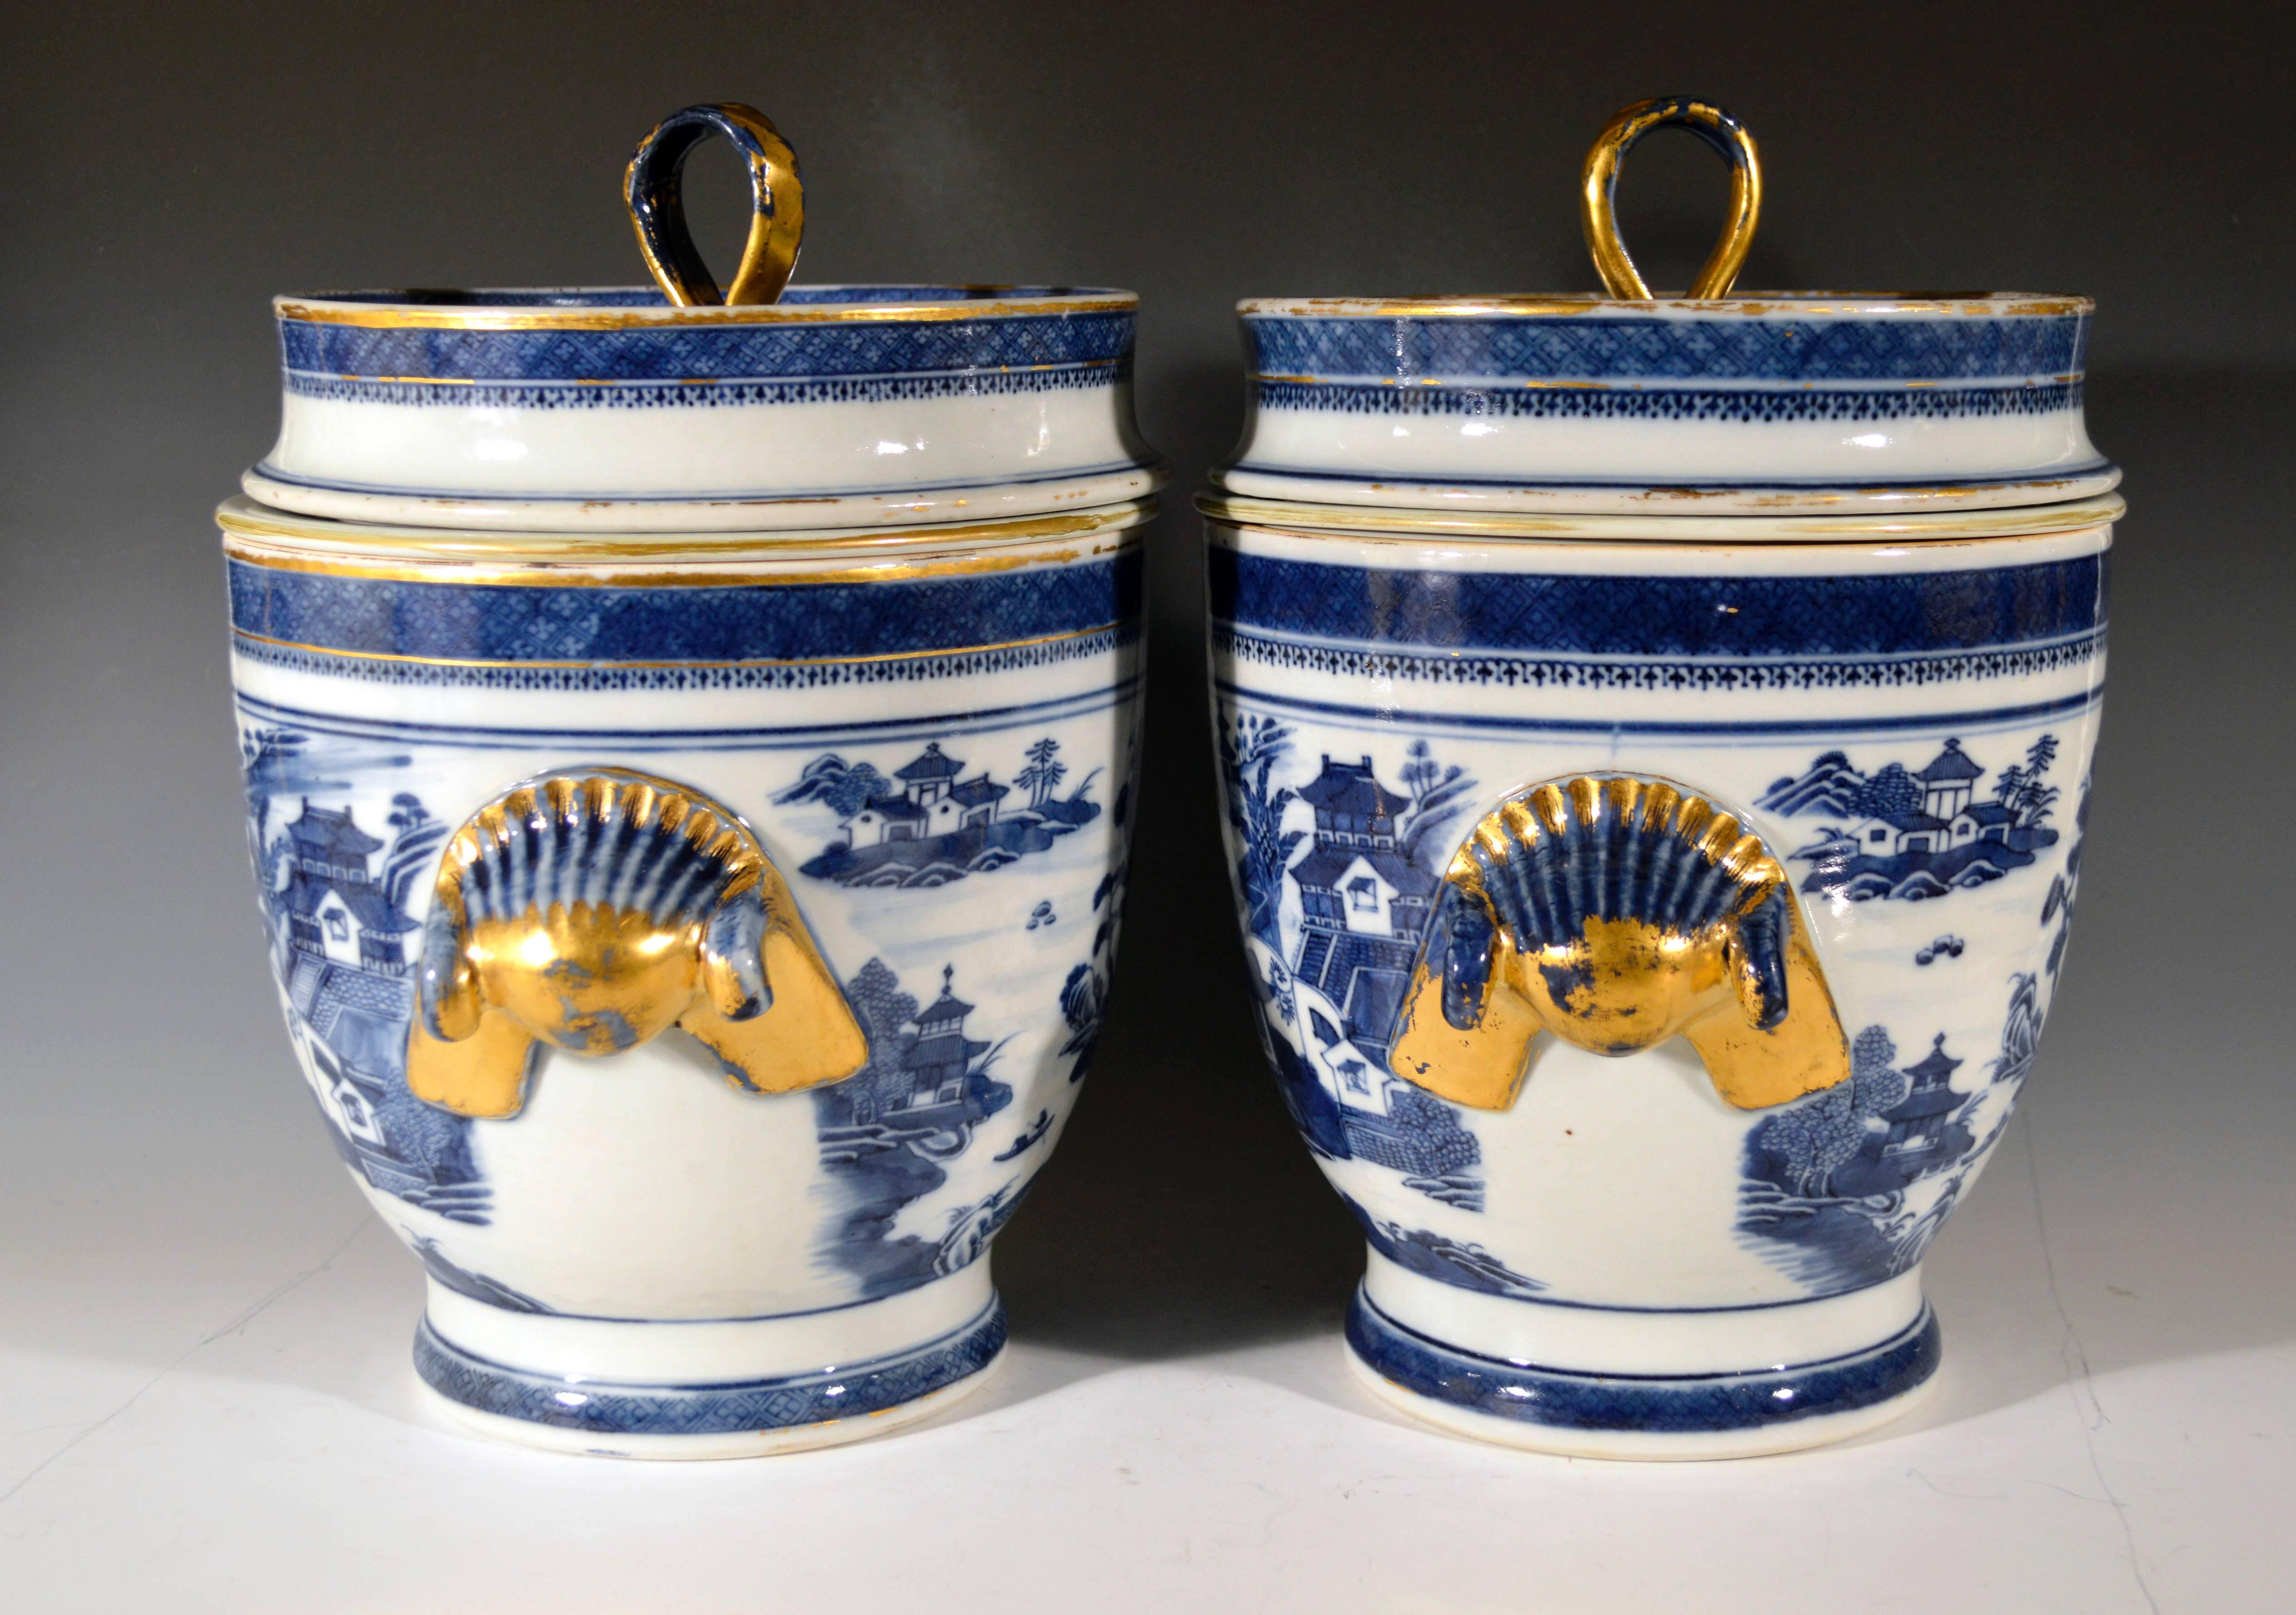 Chinese export fruit coolers are one of the rarest forms in Chinese export porcelain. The shape is very close to Coal port and Derby fruit coolers of this period. The decoration is in underglaze blue with typical Chinoiserie landscape painting with